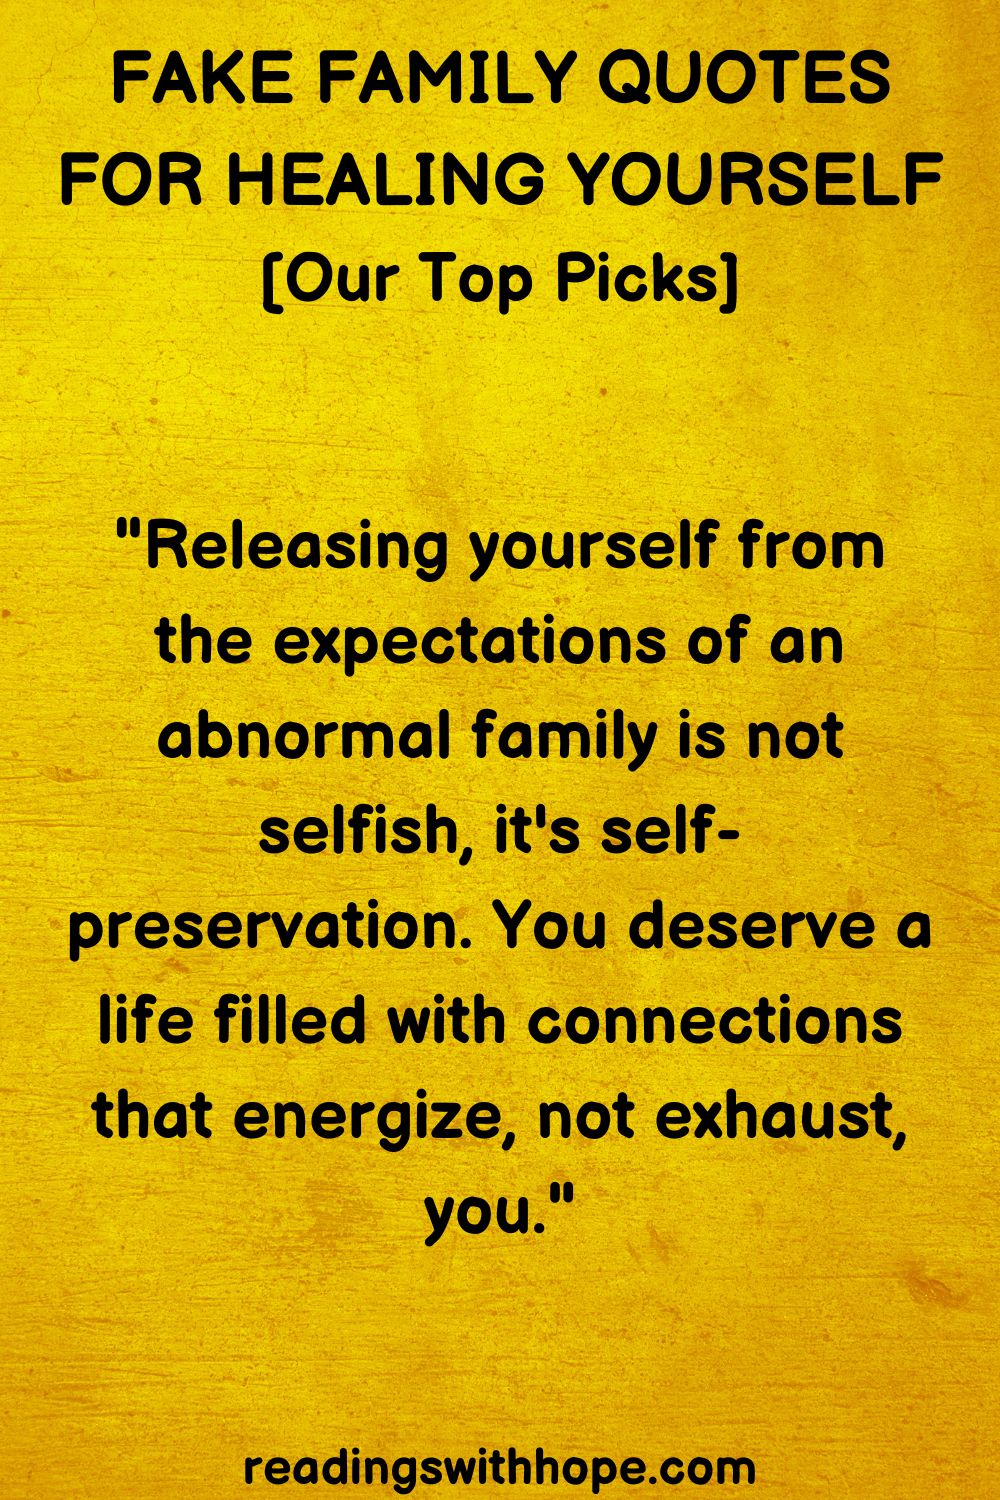 Fake Family Quotes For Healing Yourself